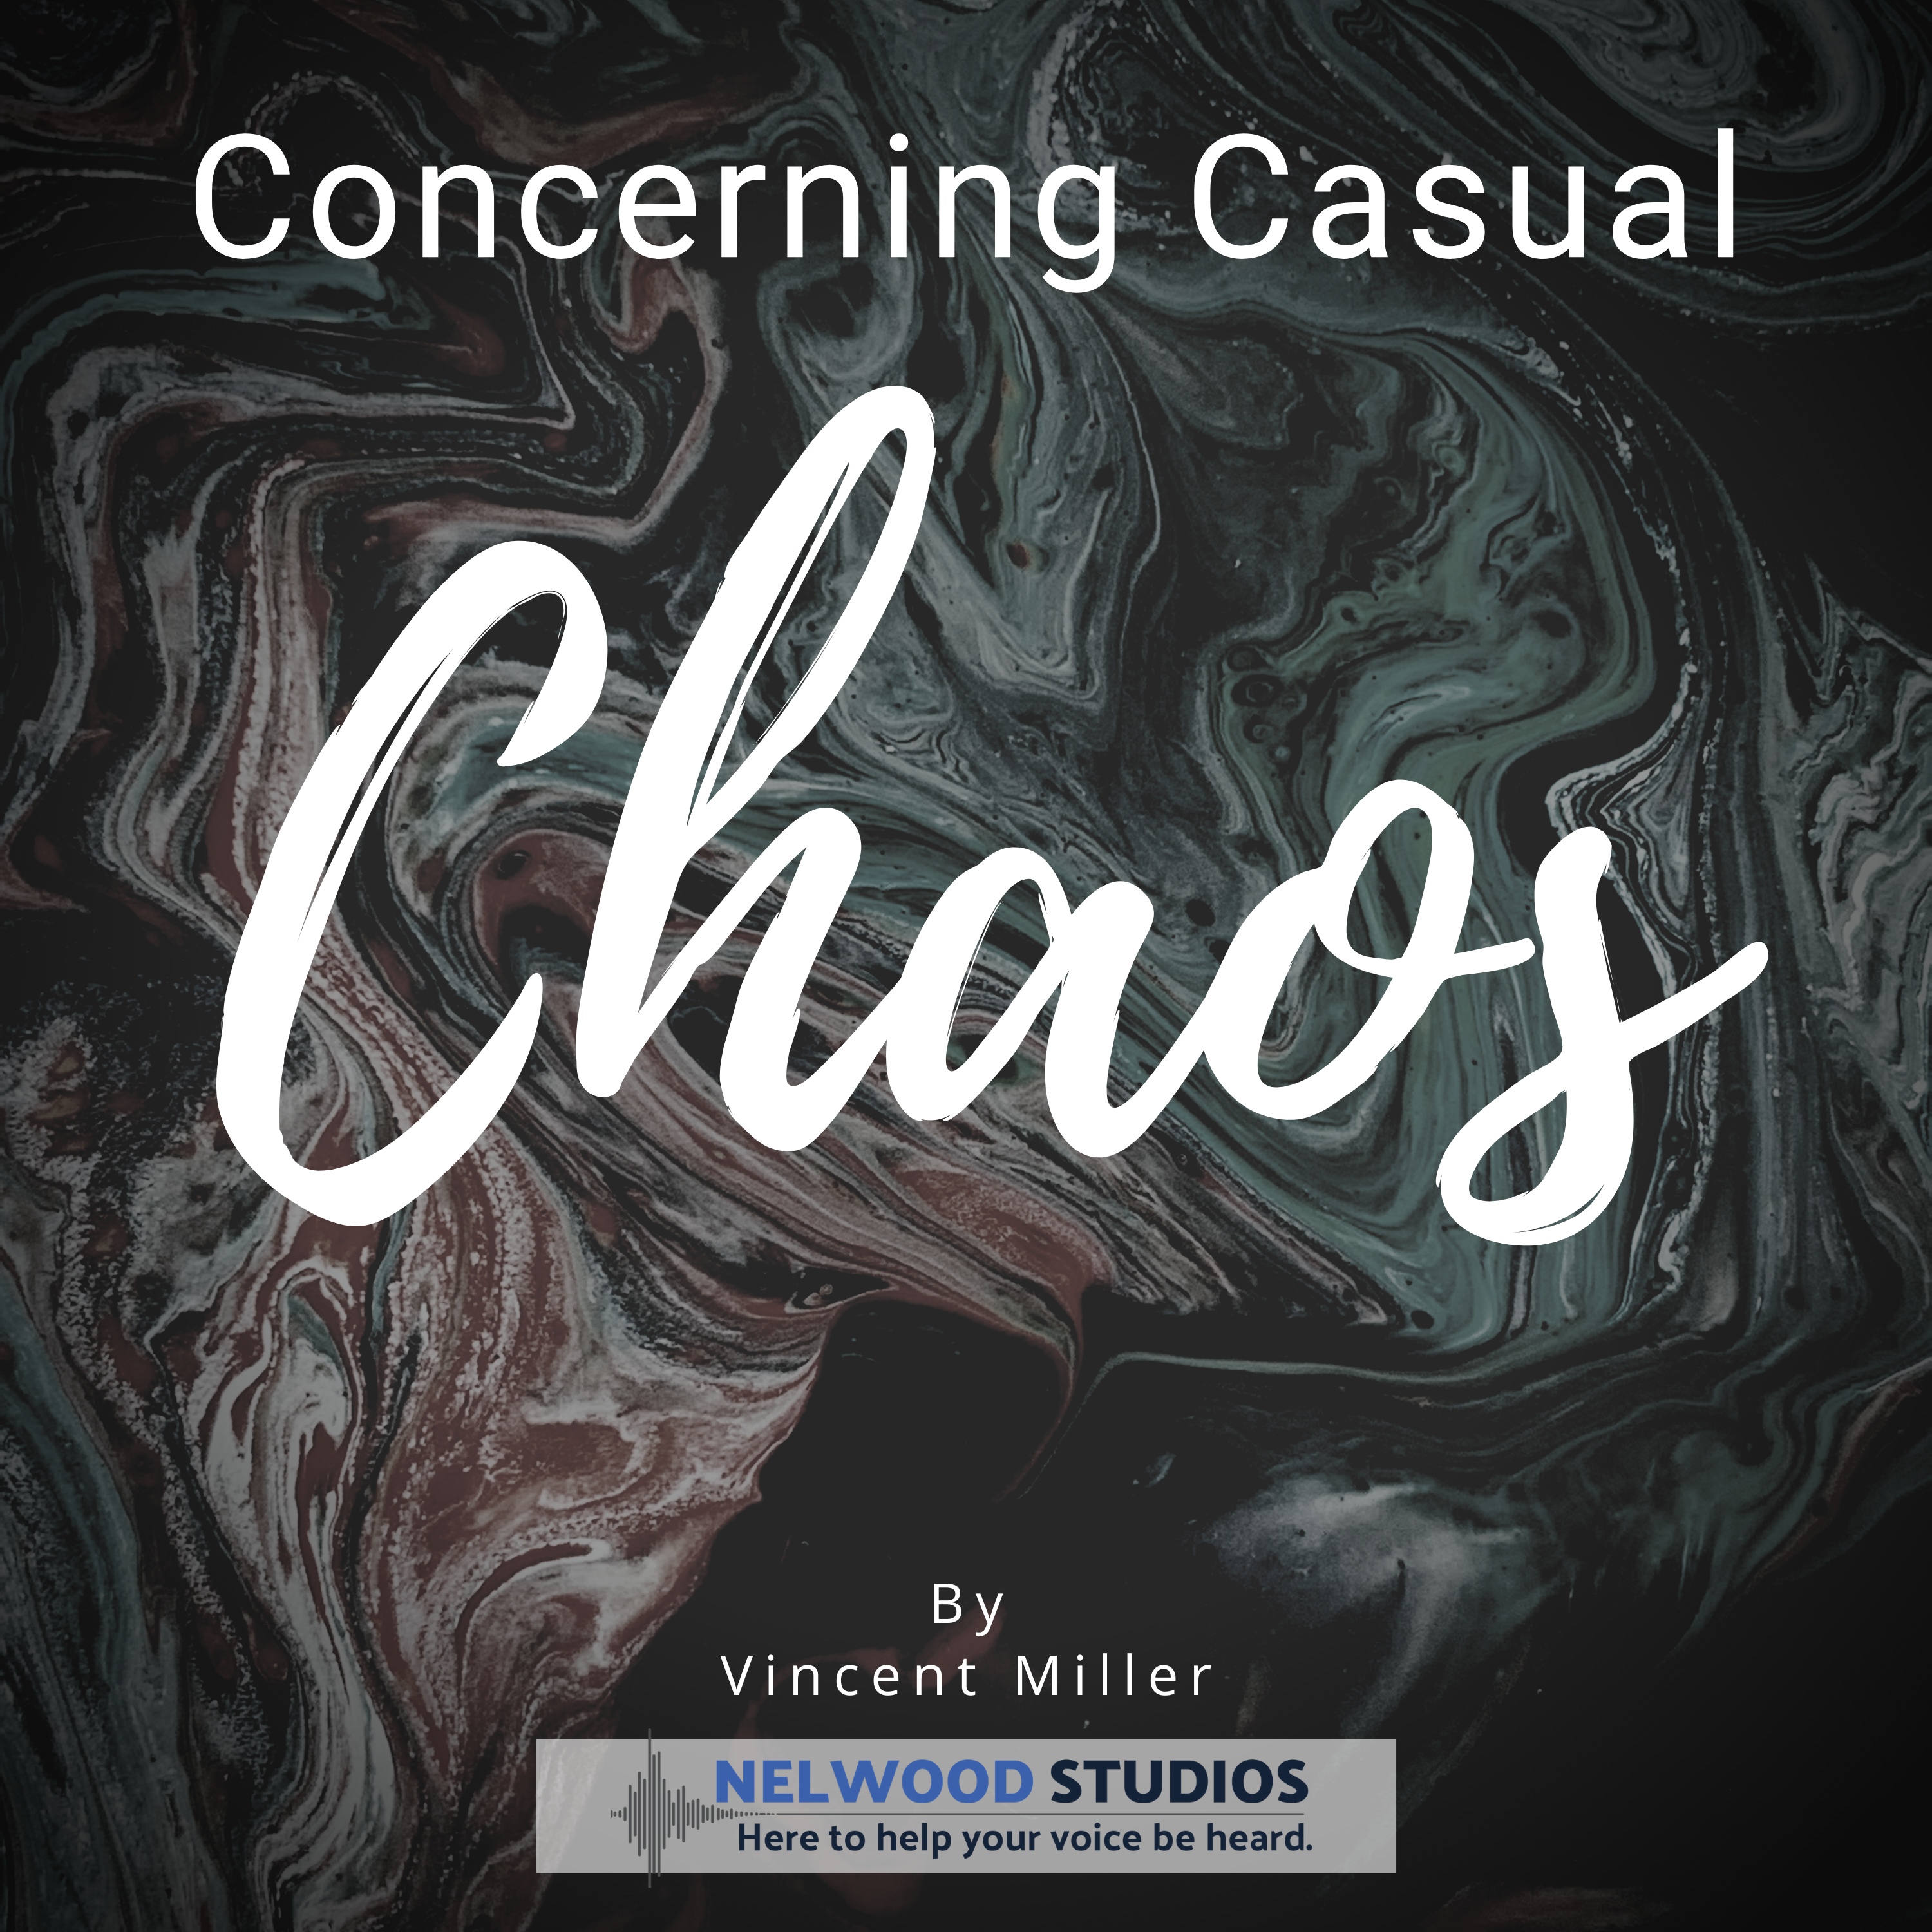 Concerning Casual Chaos